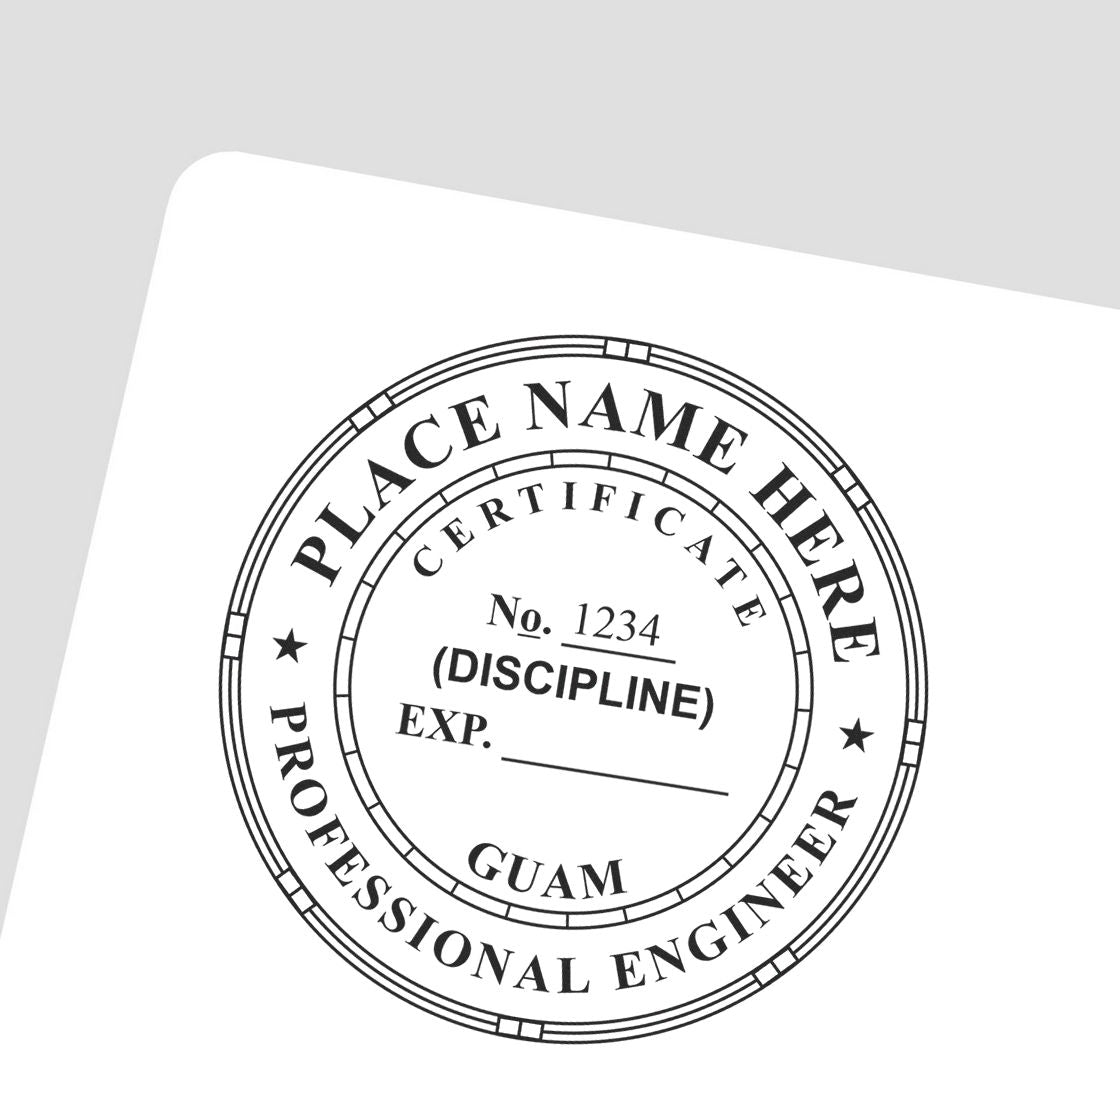 The main image for the Digital Guam PE Stamp and Electronic Seal for Guam Engineer depicting a sample of the imprint and electronic files